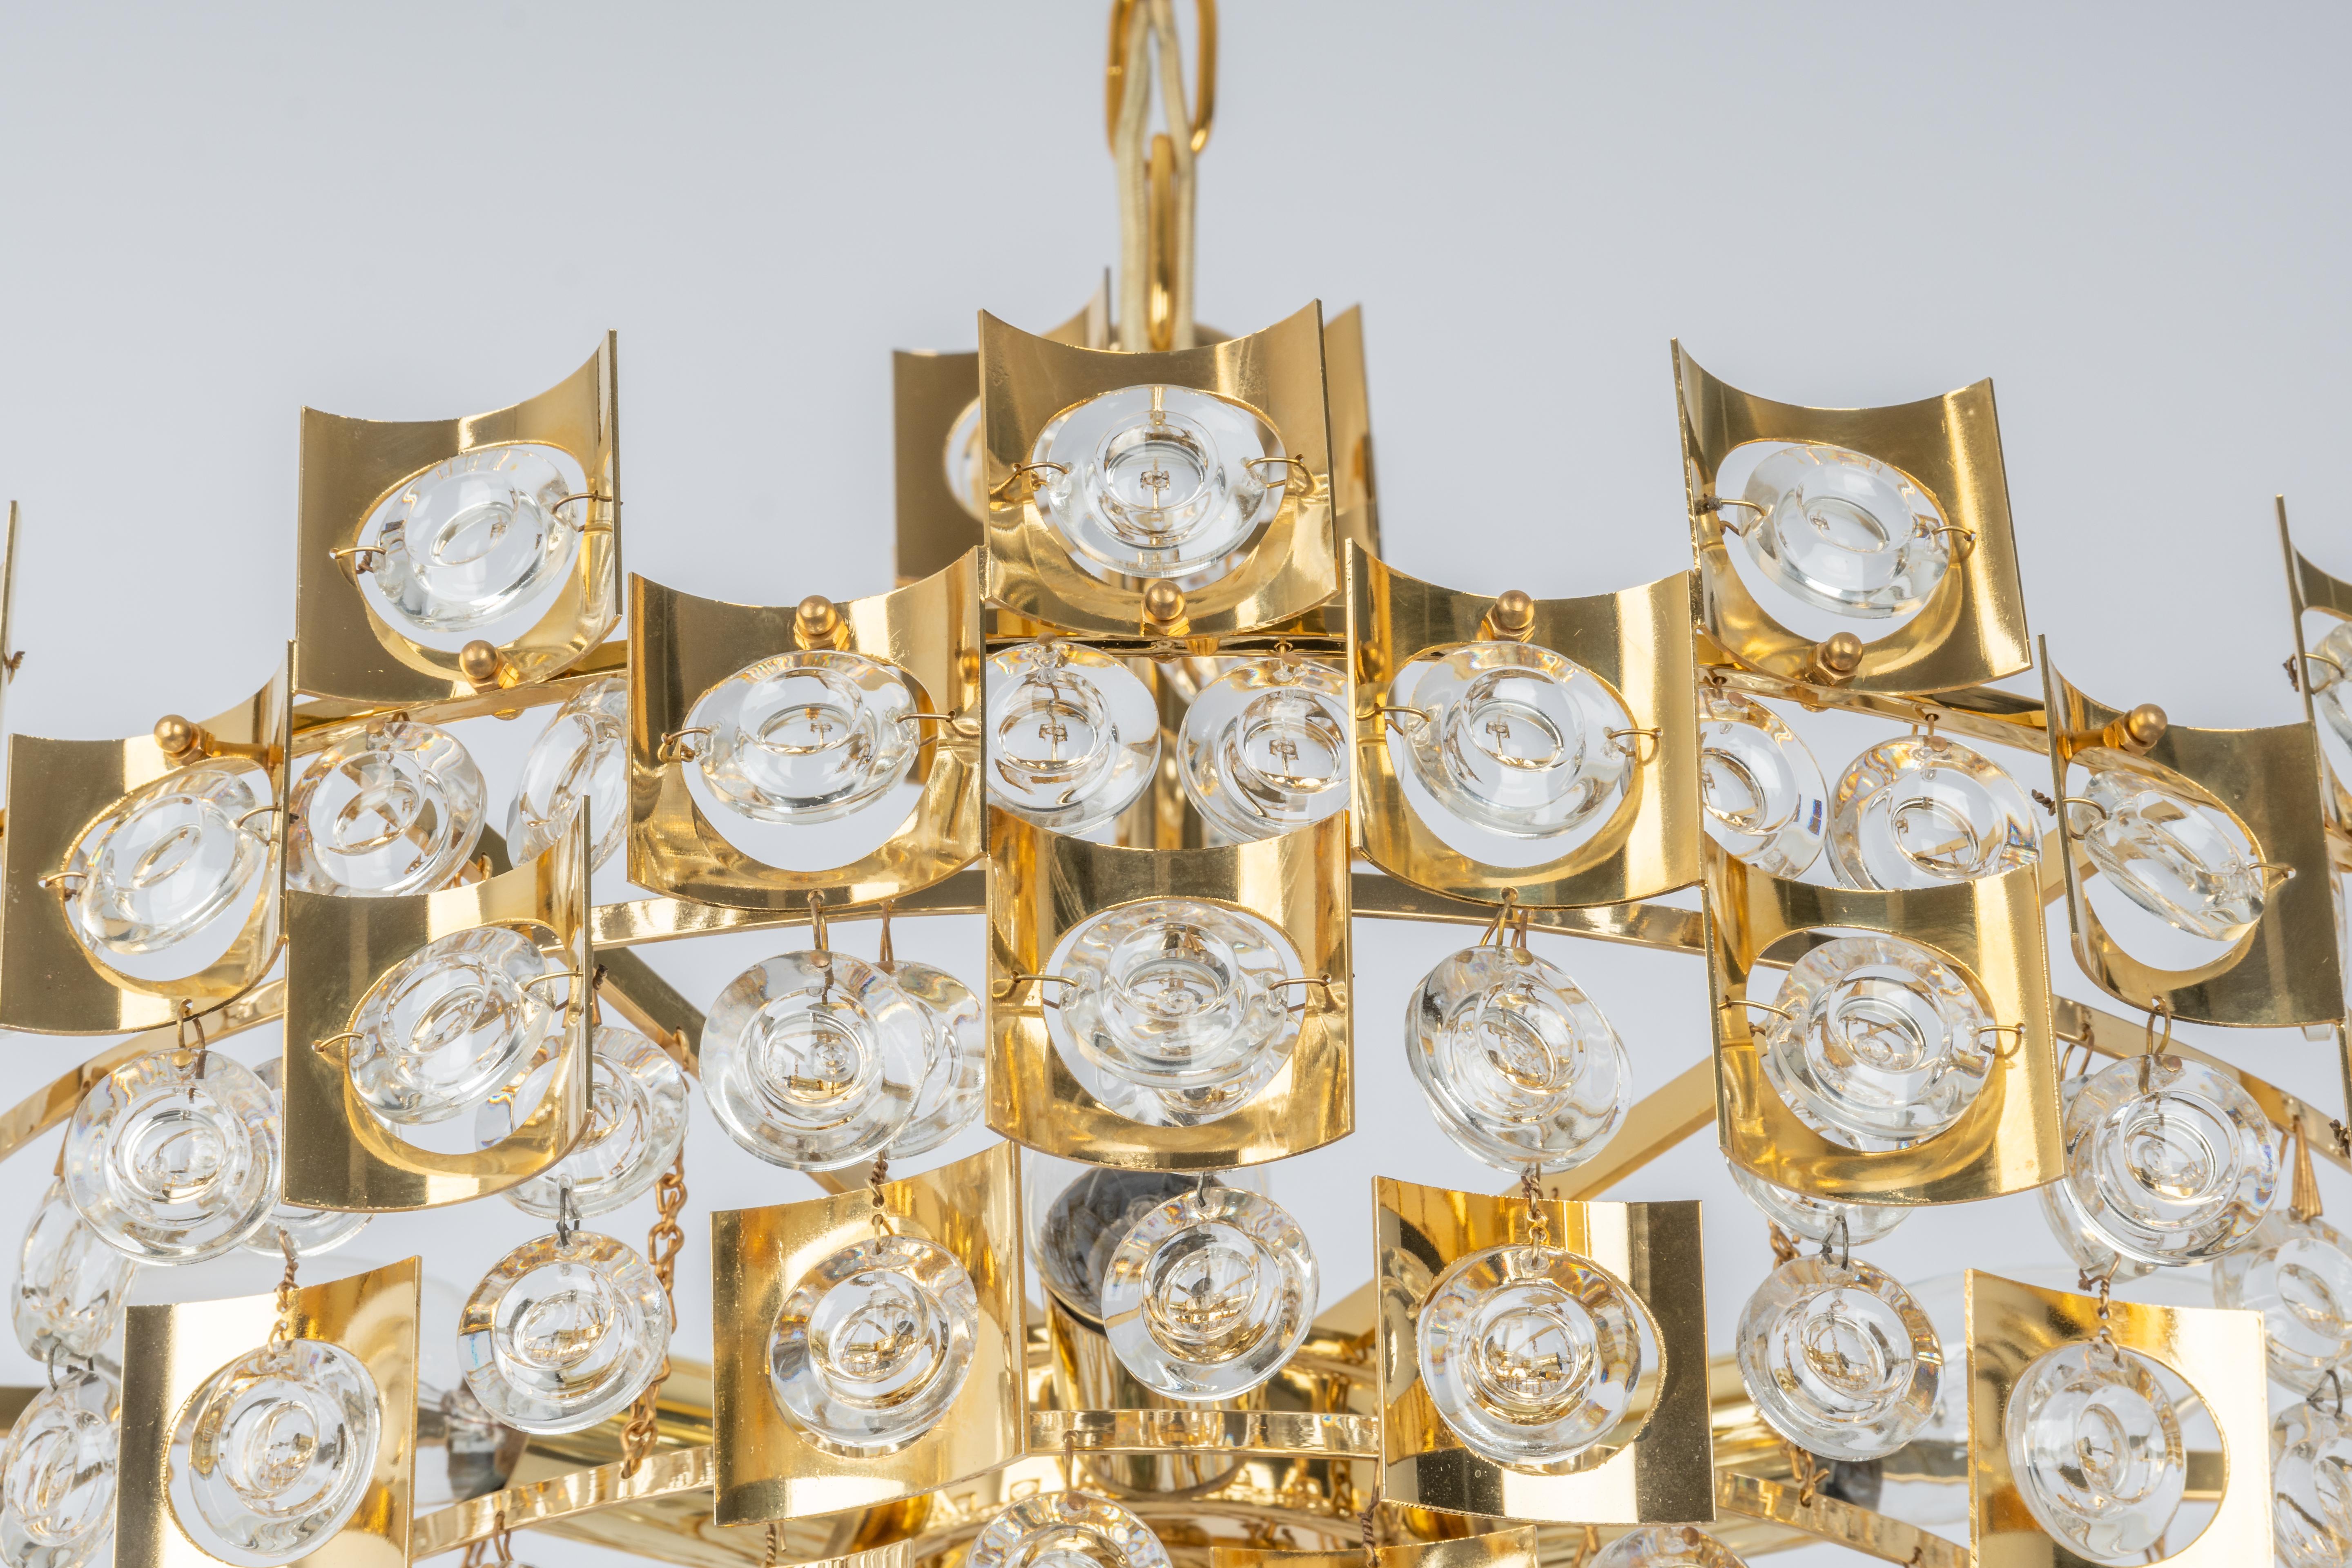 Mid-Century Modern Impressive Large Gilt Brass and Crystal Glass Chandelier by Palwa Germany, 1960s For Sale